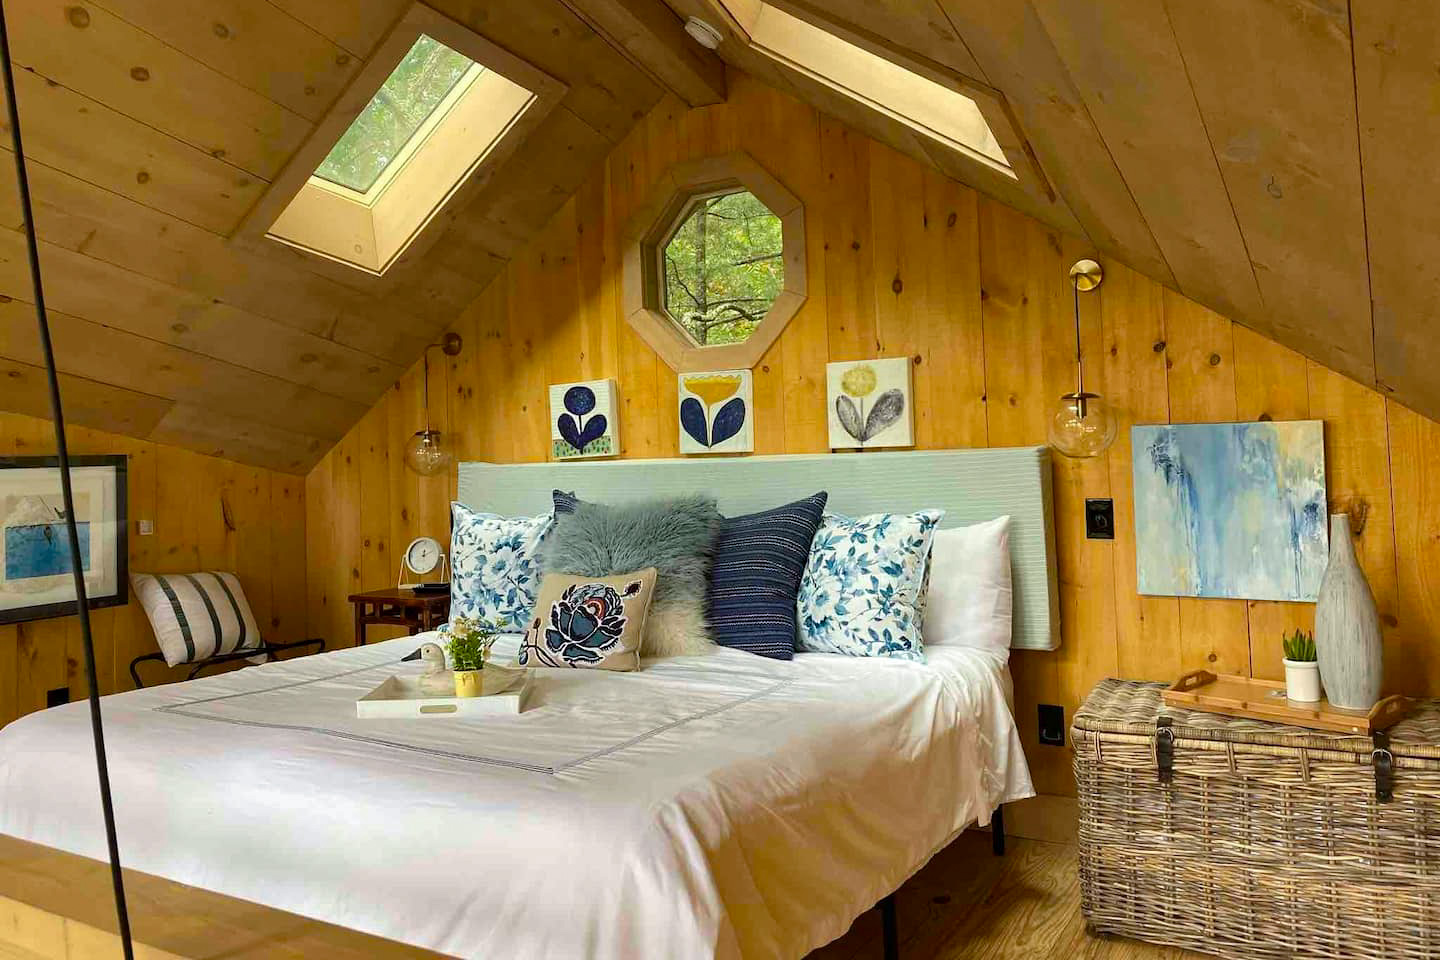 Bed with white sheets and blue pillows situated in a treehouse loft set-up.